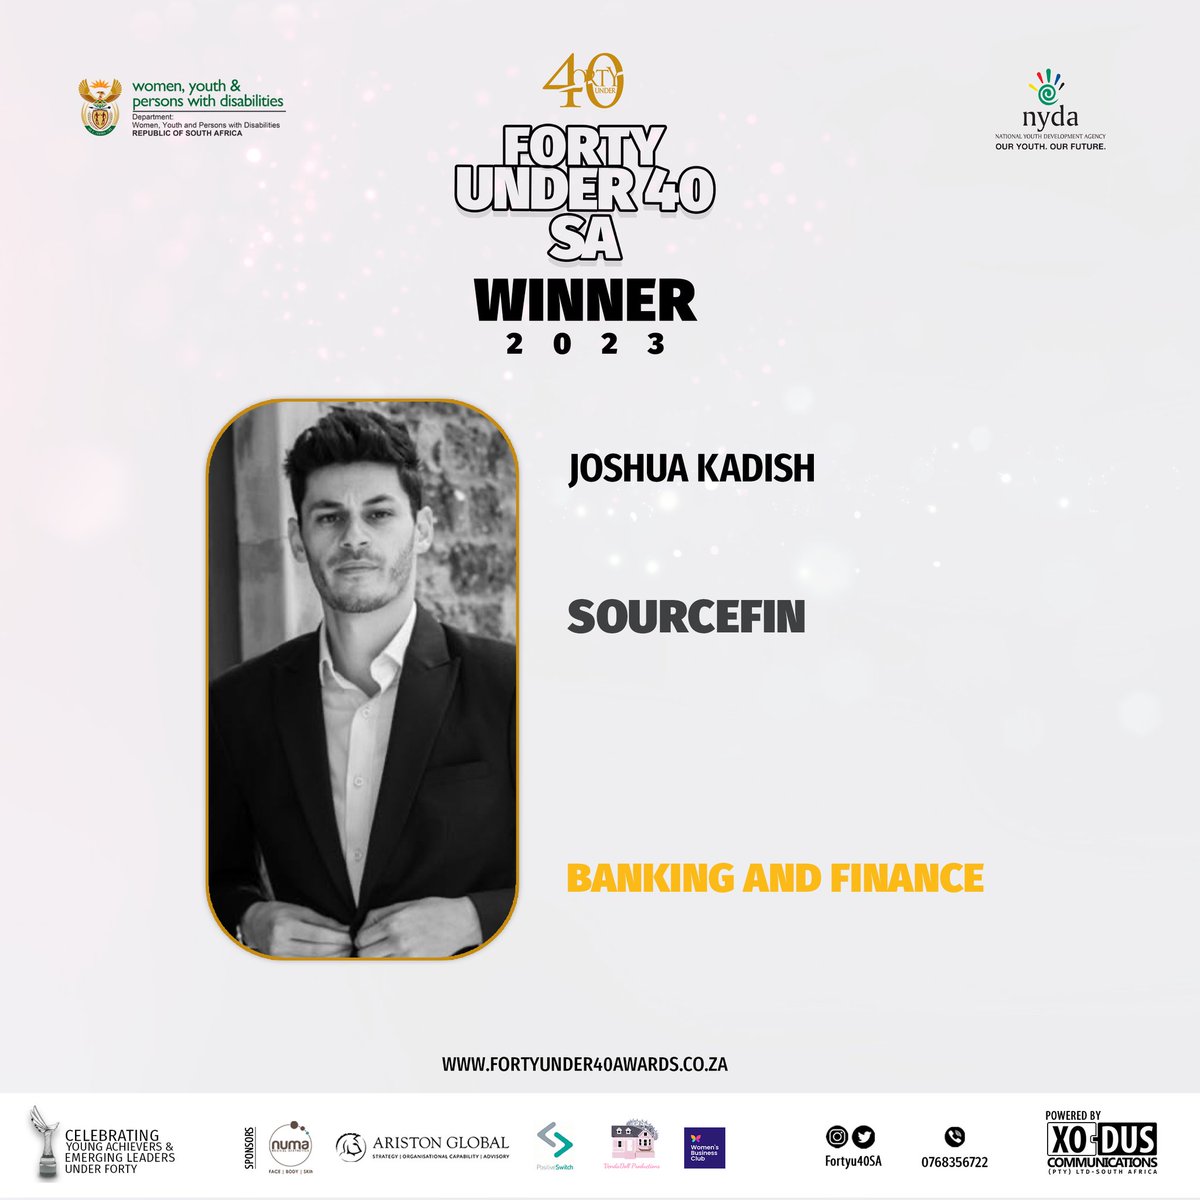 Congratulations to all the Award winners of the Forty Under 40 Awards South Africa 2023 The event took place on 9th September 2023 at the Houghton Hotel For more info, visit fortyunder40awards.co.za #FortyUnder40SouthAfrica #spottedunder40